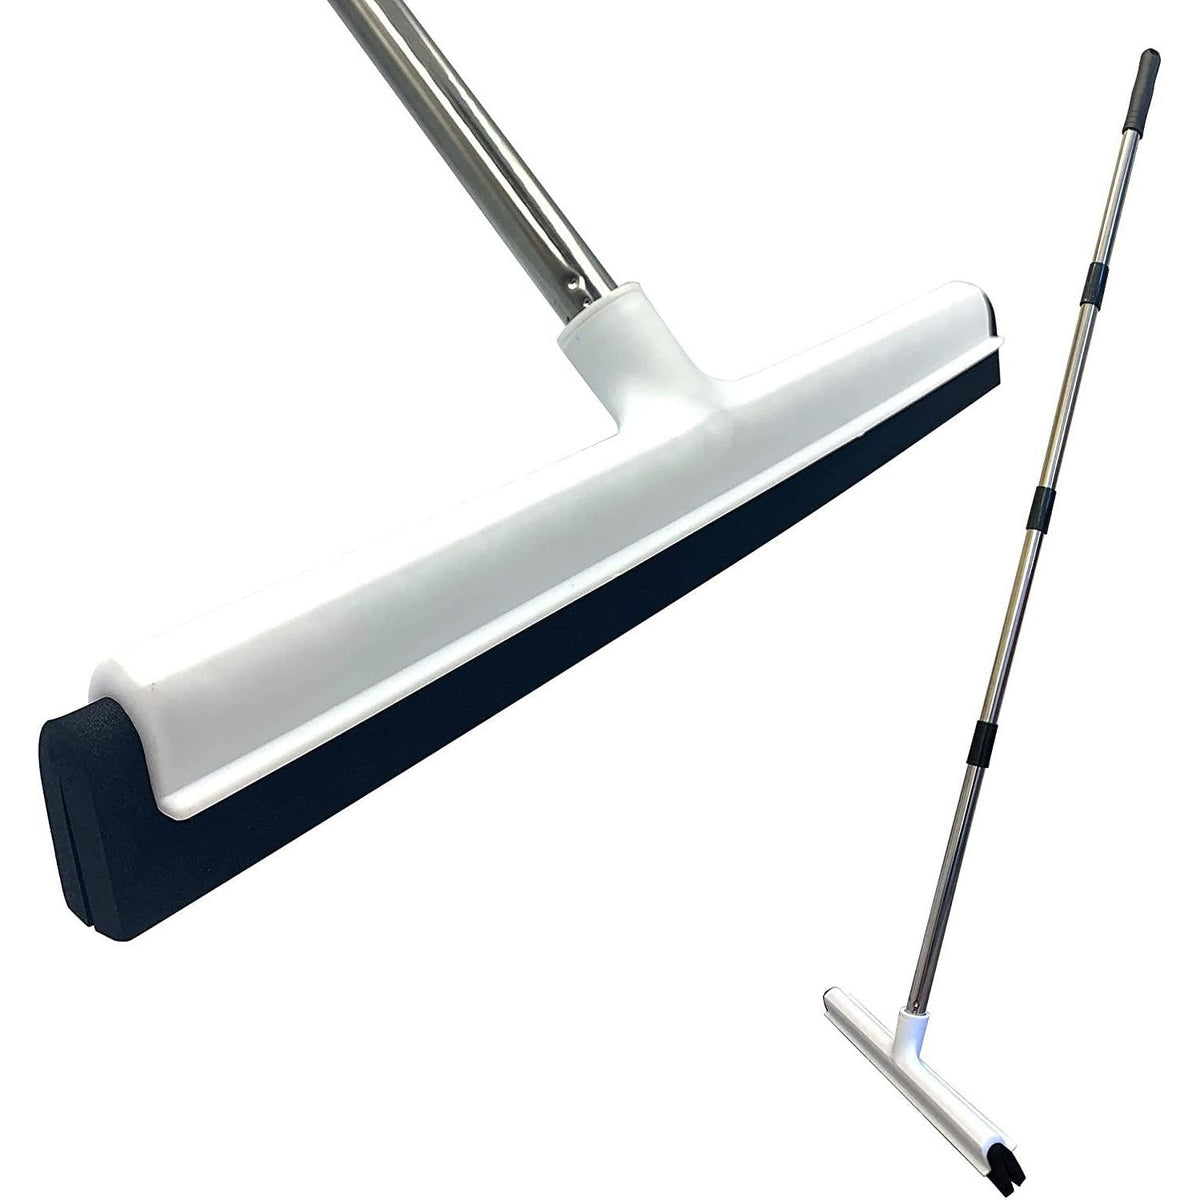 Floor Squeegee with 4 Piece Stainless Steel Handle